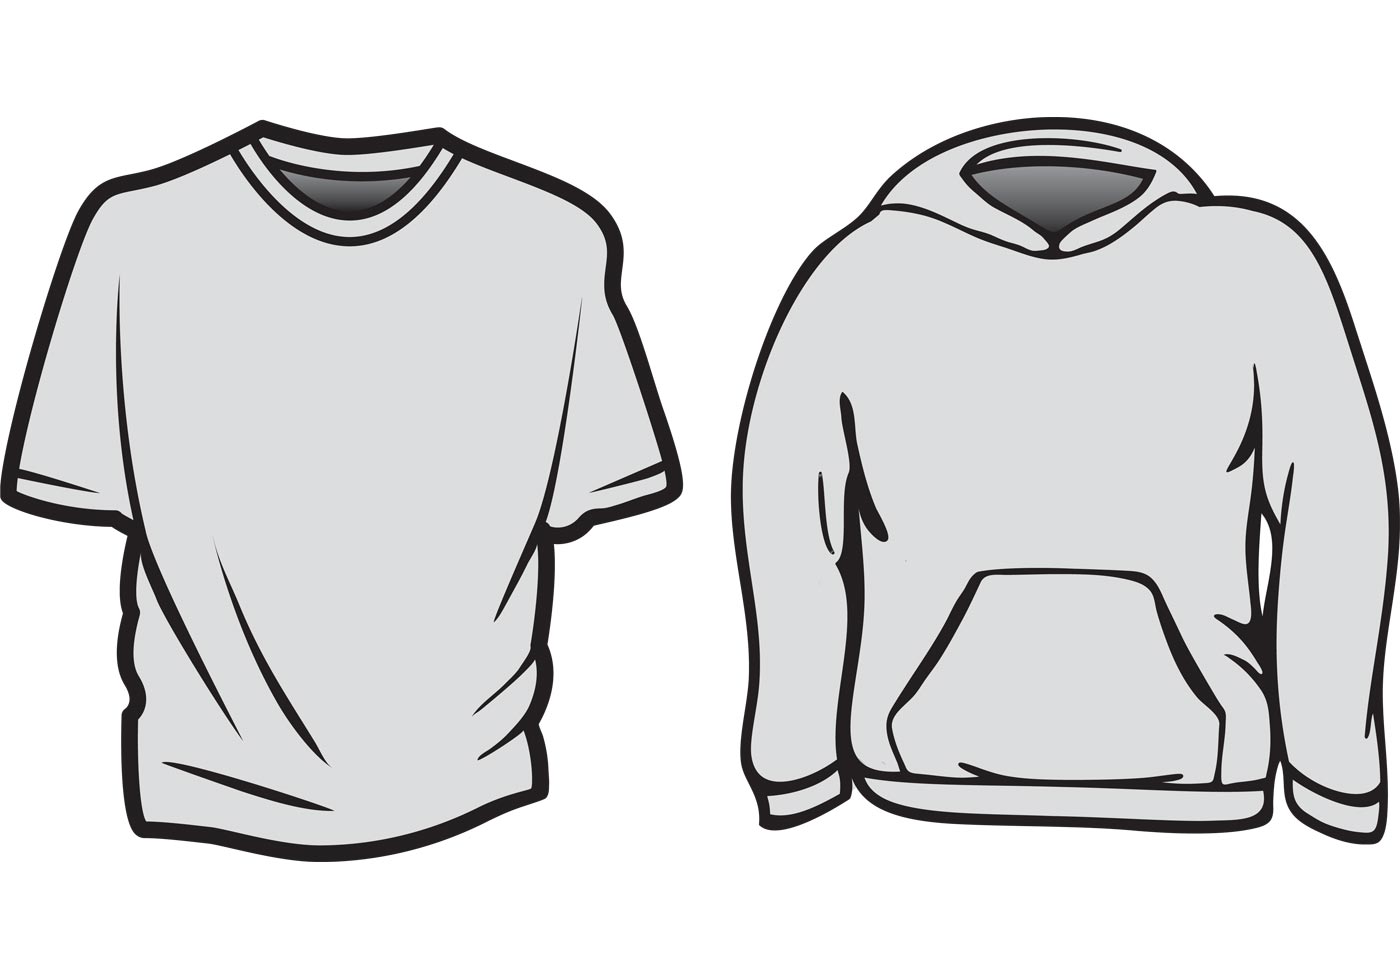 Download Free Vector T-Shirt Templates - Download Free Vector Art, Stock Graphics & Images